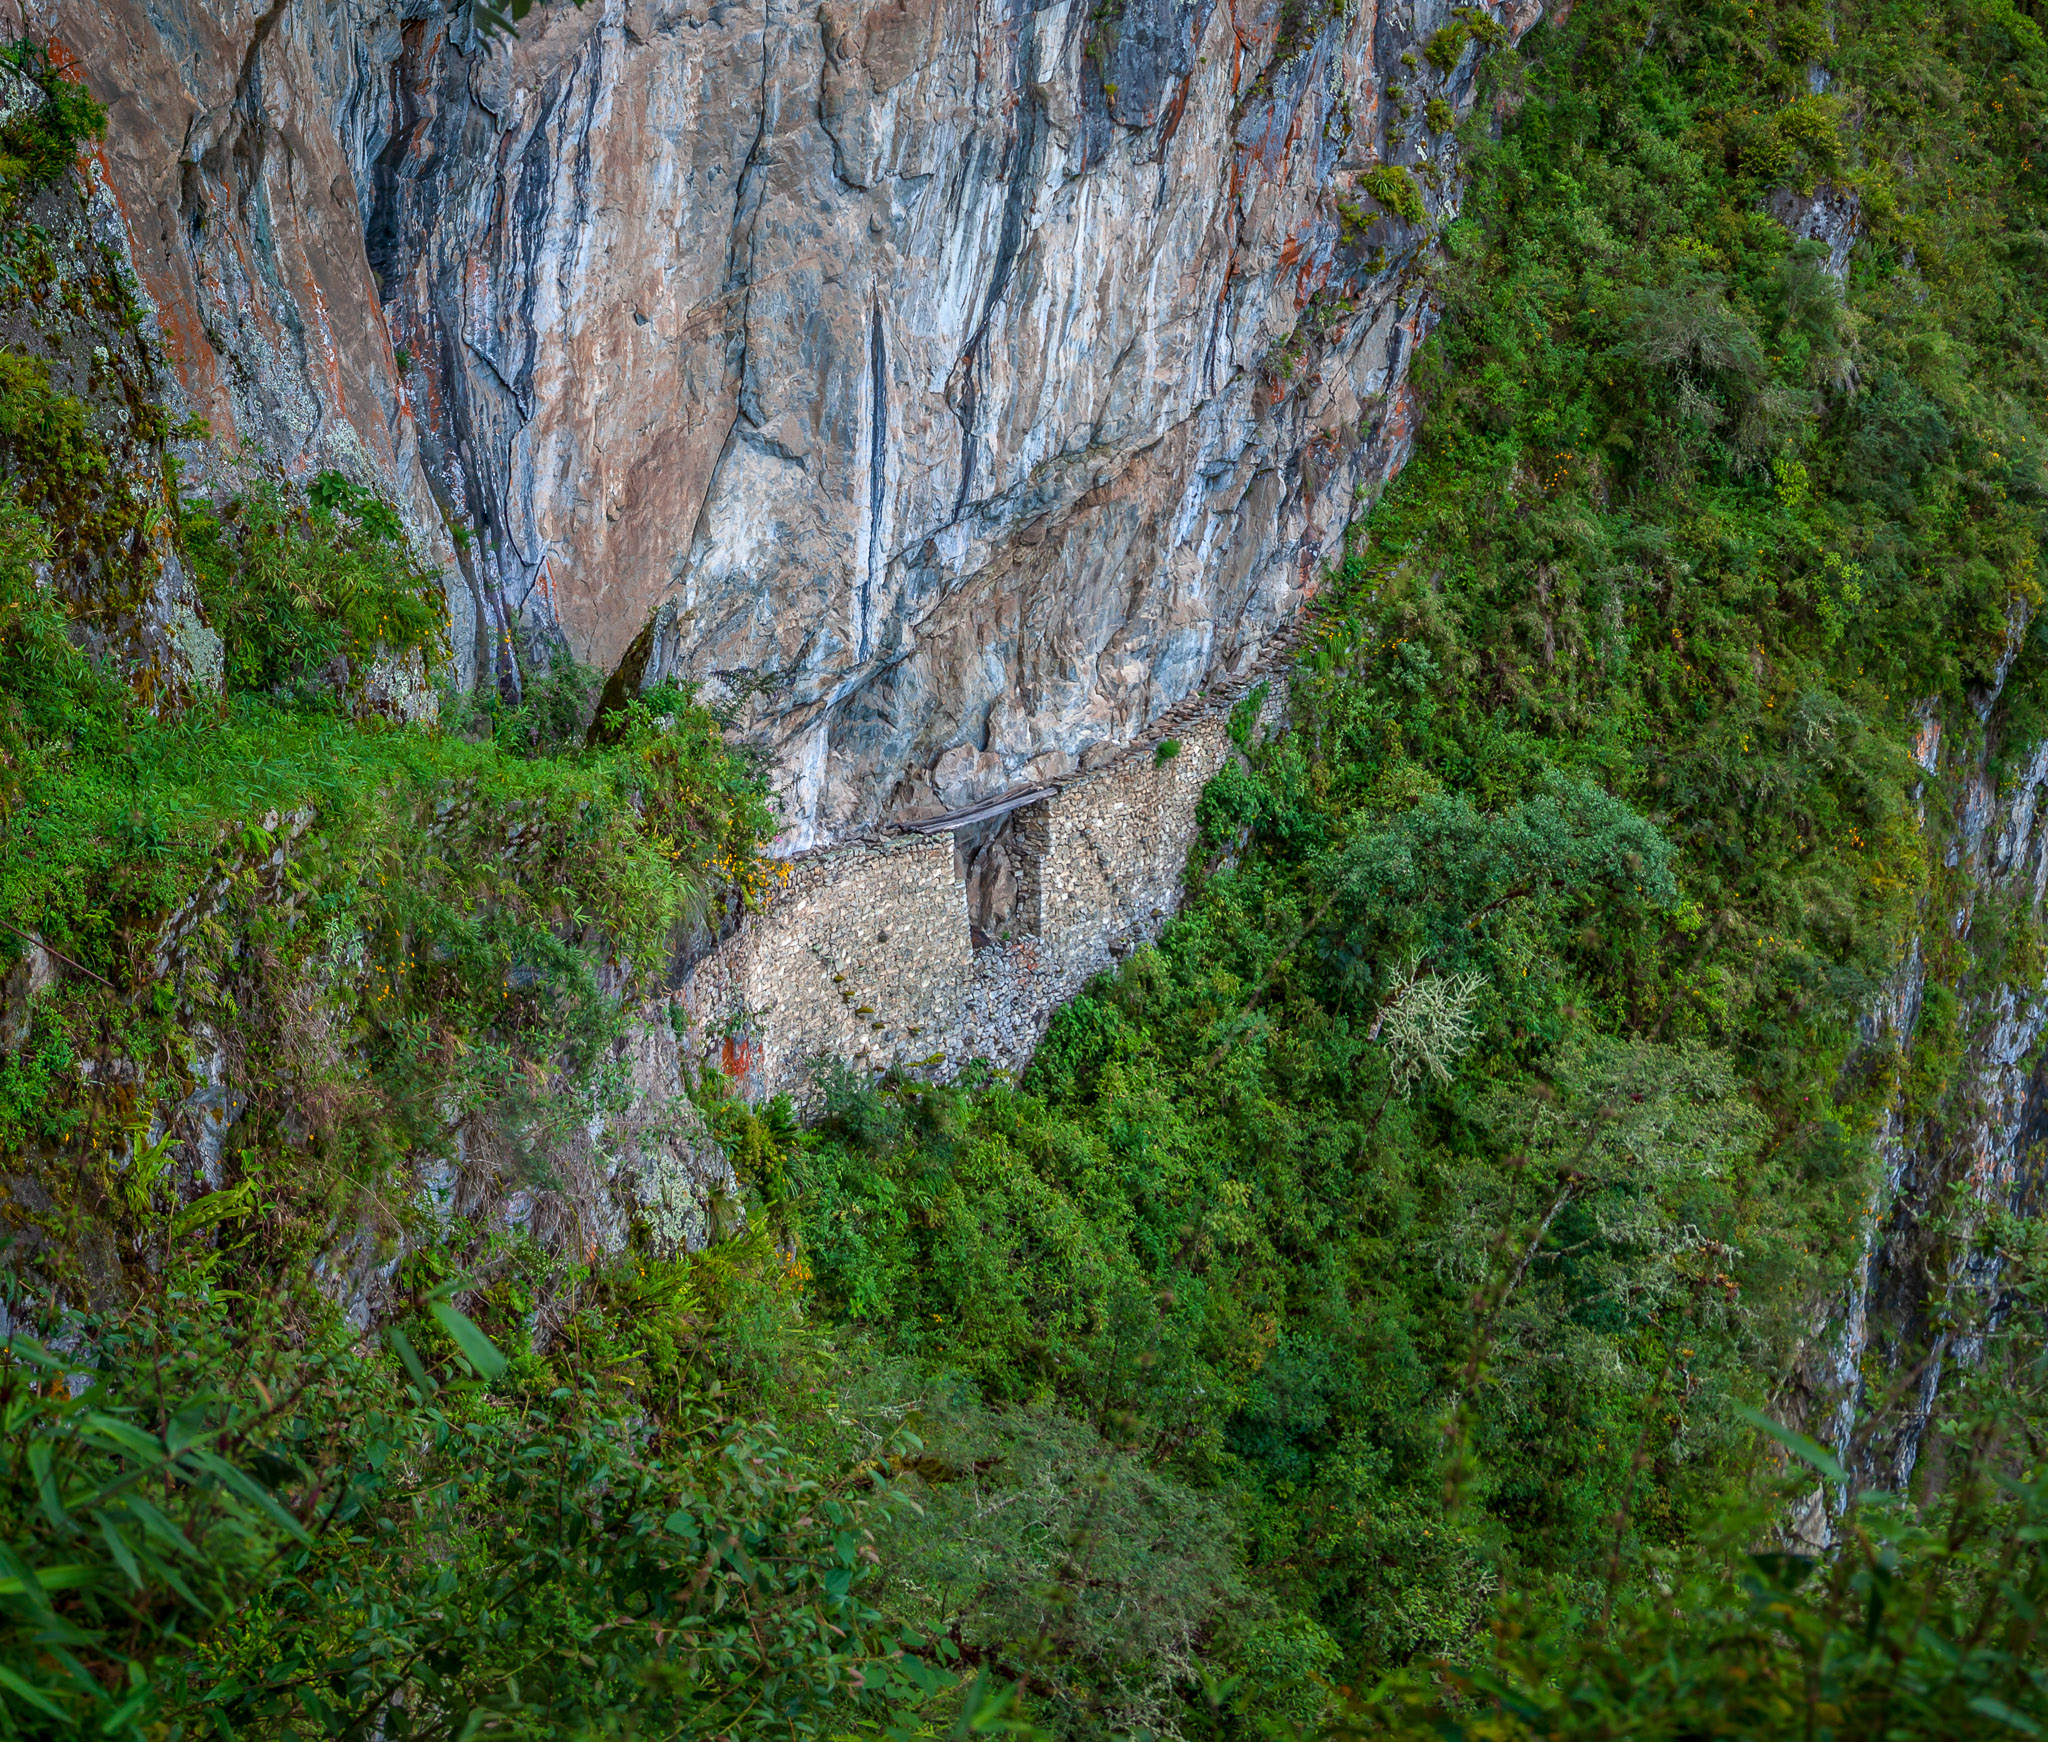 Inca Bridge, SW entrance to Machu Picchu – easily defended approach